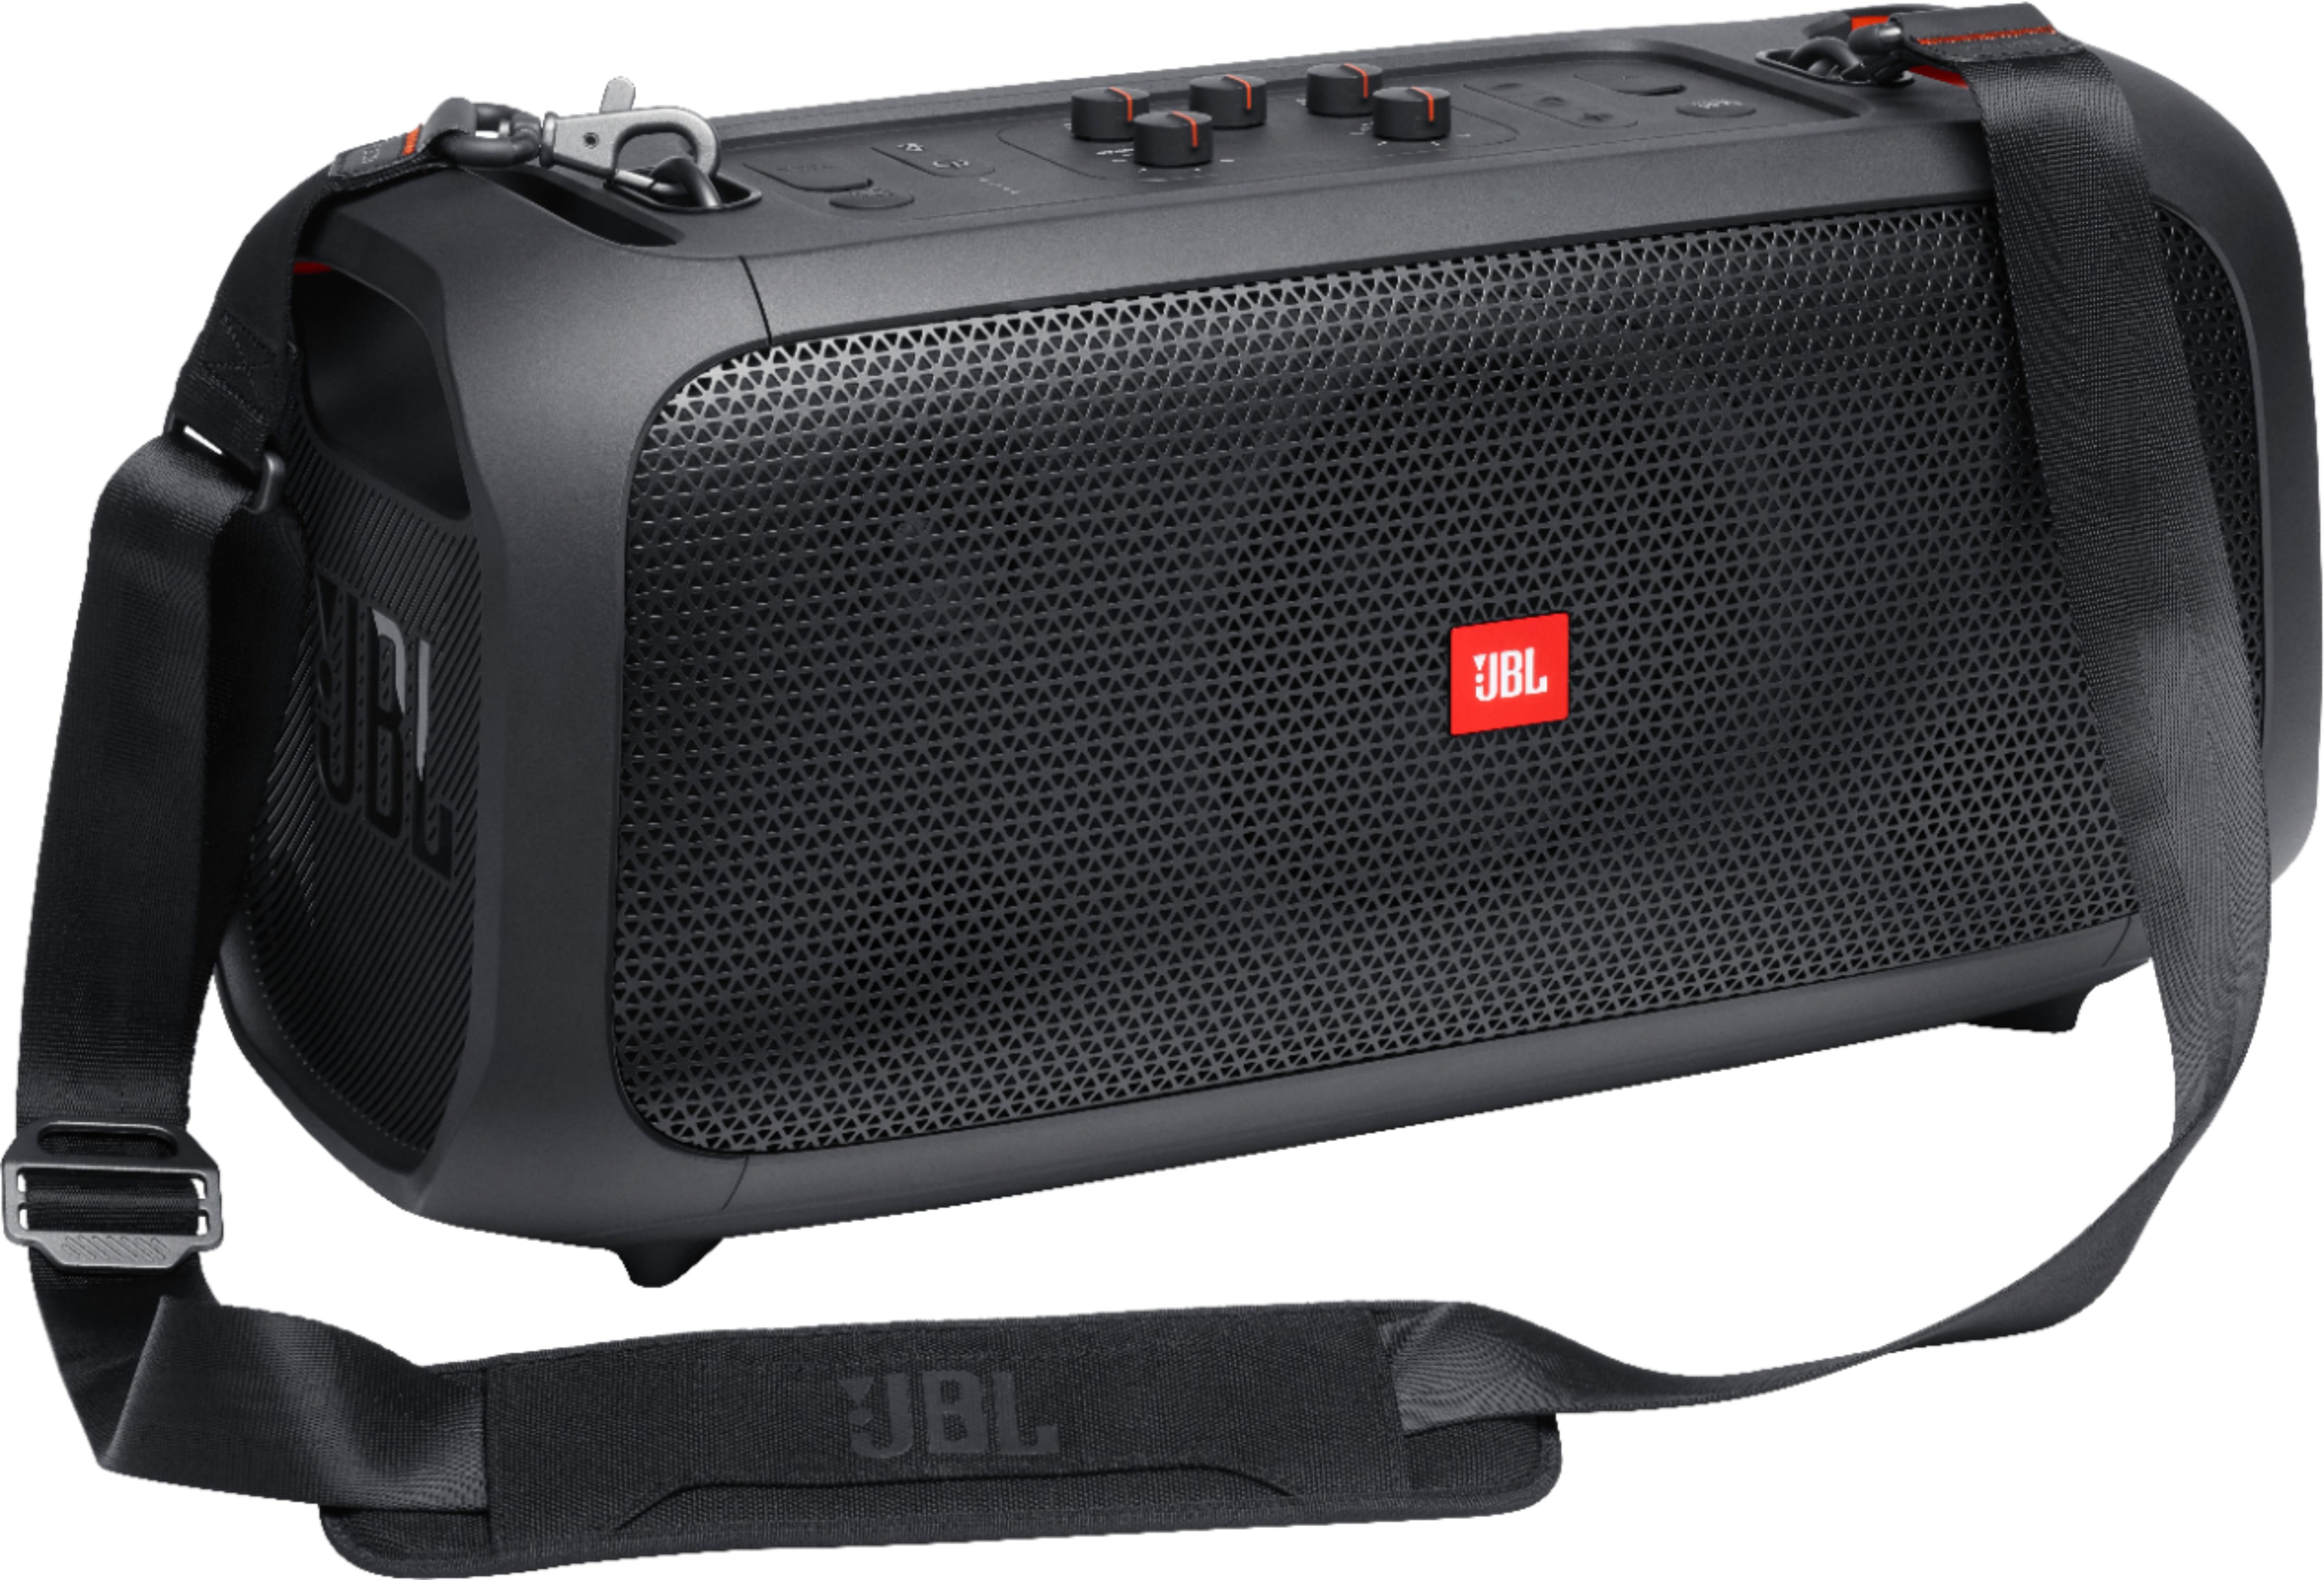 WIN JBL PartyBox Go, How would you like a JBL PartyBox Go speaker for  Christmas? Enter our competition and you could win one! To enter: Tell us  your favourite song Follow